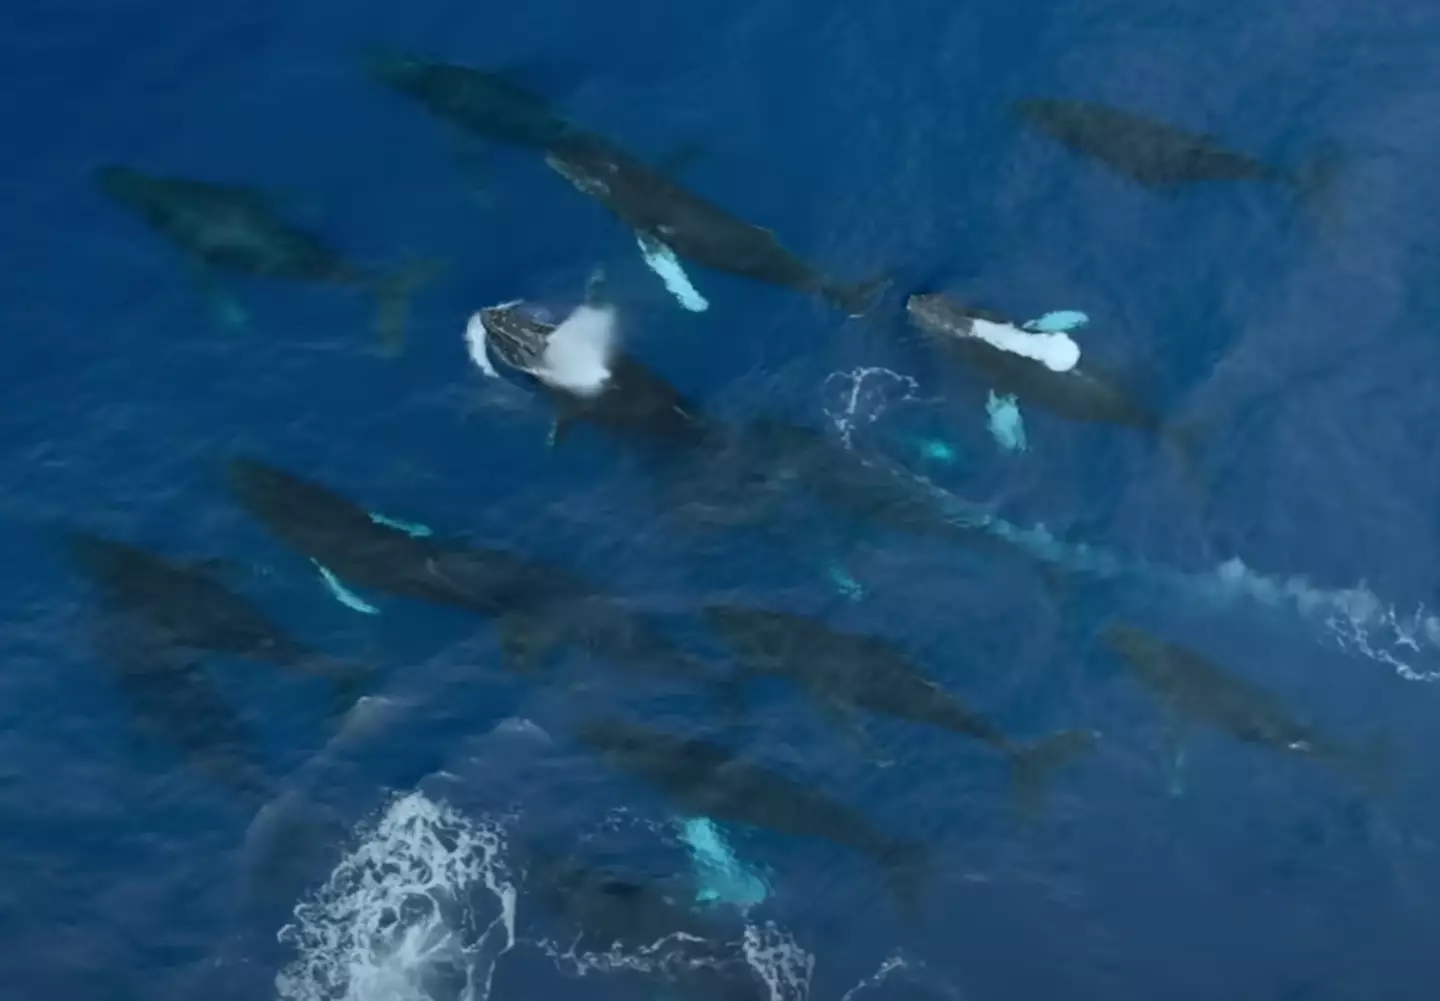 The team saw a group of male whales surrounding a female.